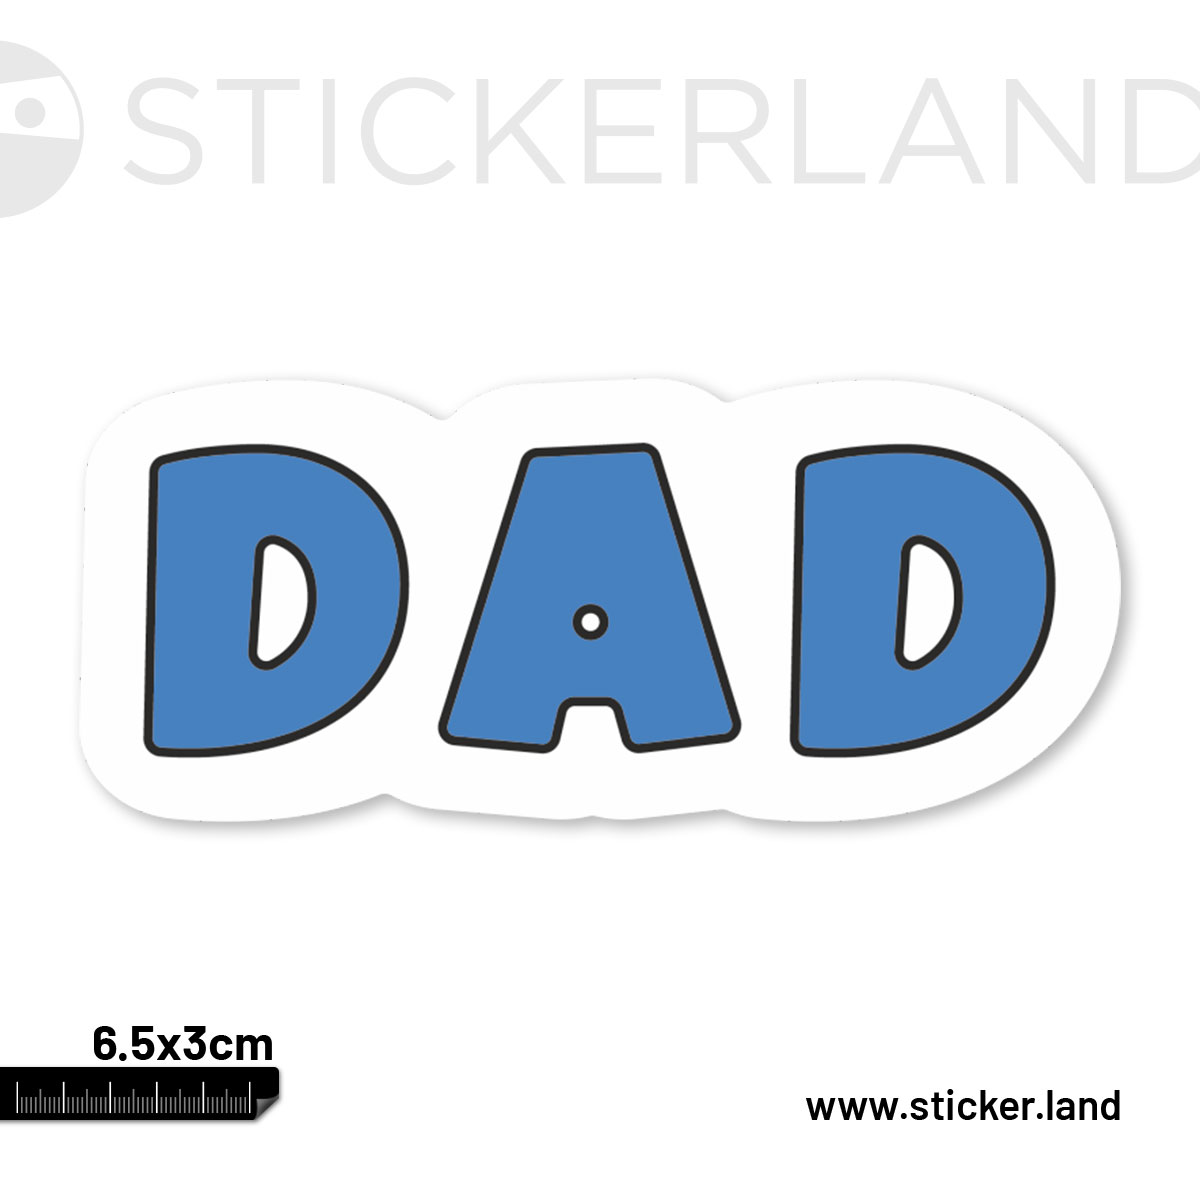 Are you a dad's little princess??

Buy now: sticker.land/collections/re…

#stickerland #stickerland #followformore #3M #premiummaterial #makeuplover #makeupgoals
#makeuptutorial #makeuppictorial #brightmakeup